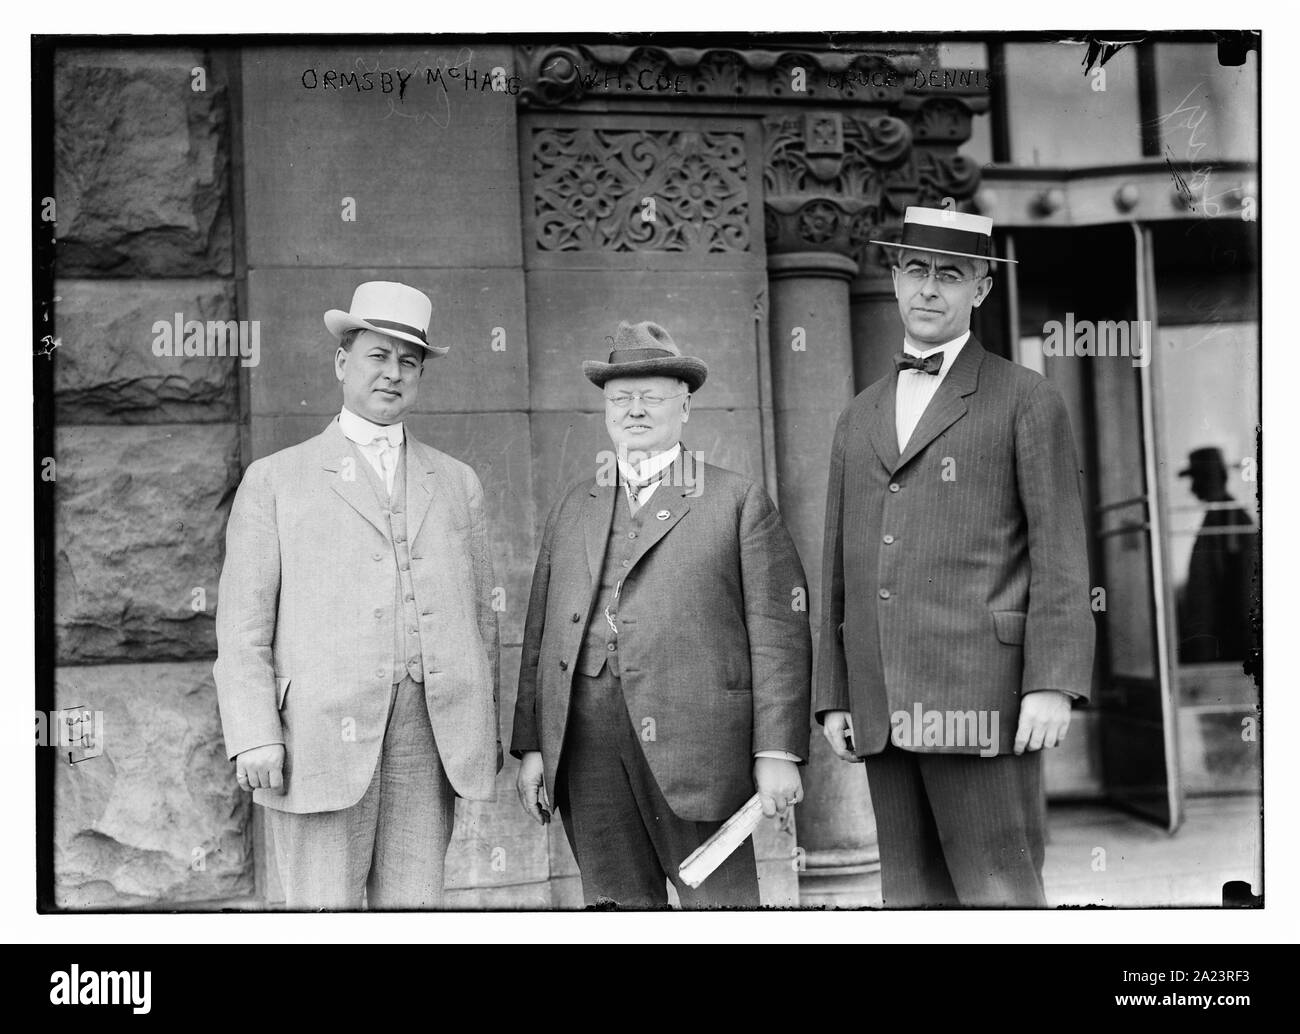 Ormsby McHarg, W.H. Coe, Bruce Dennis Stockfoto